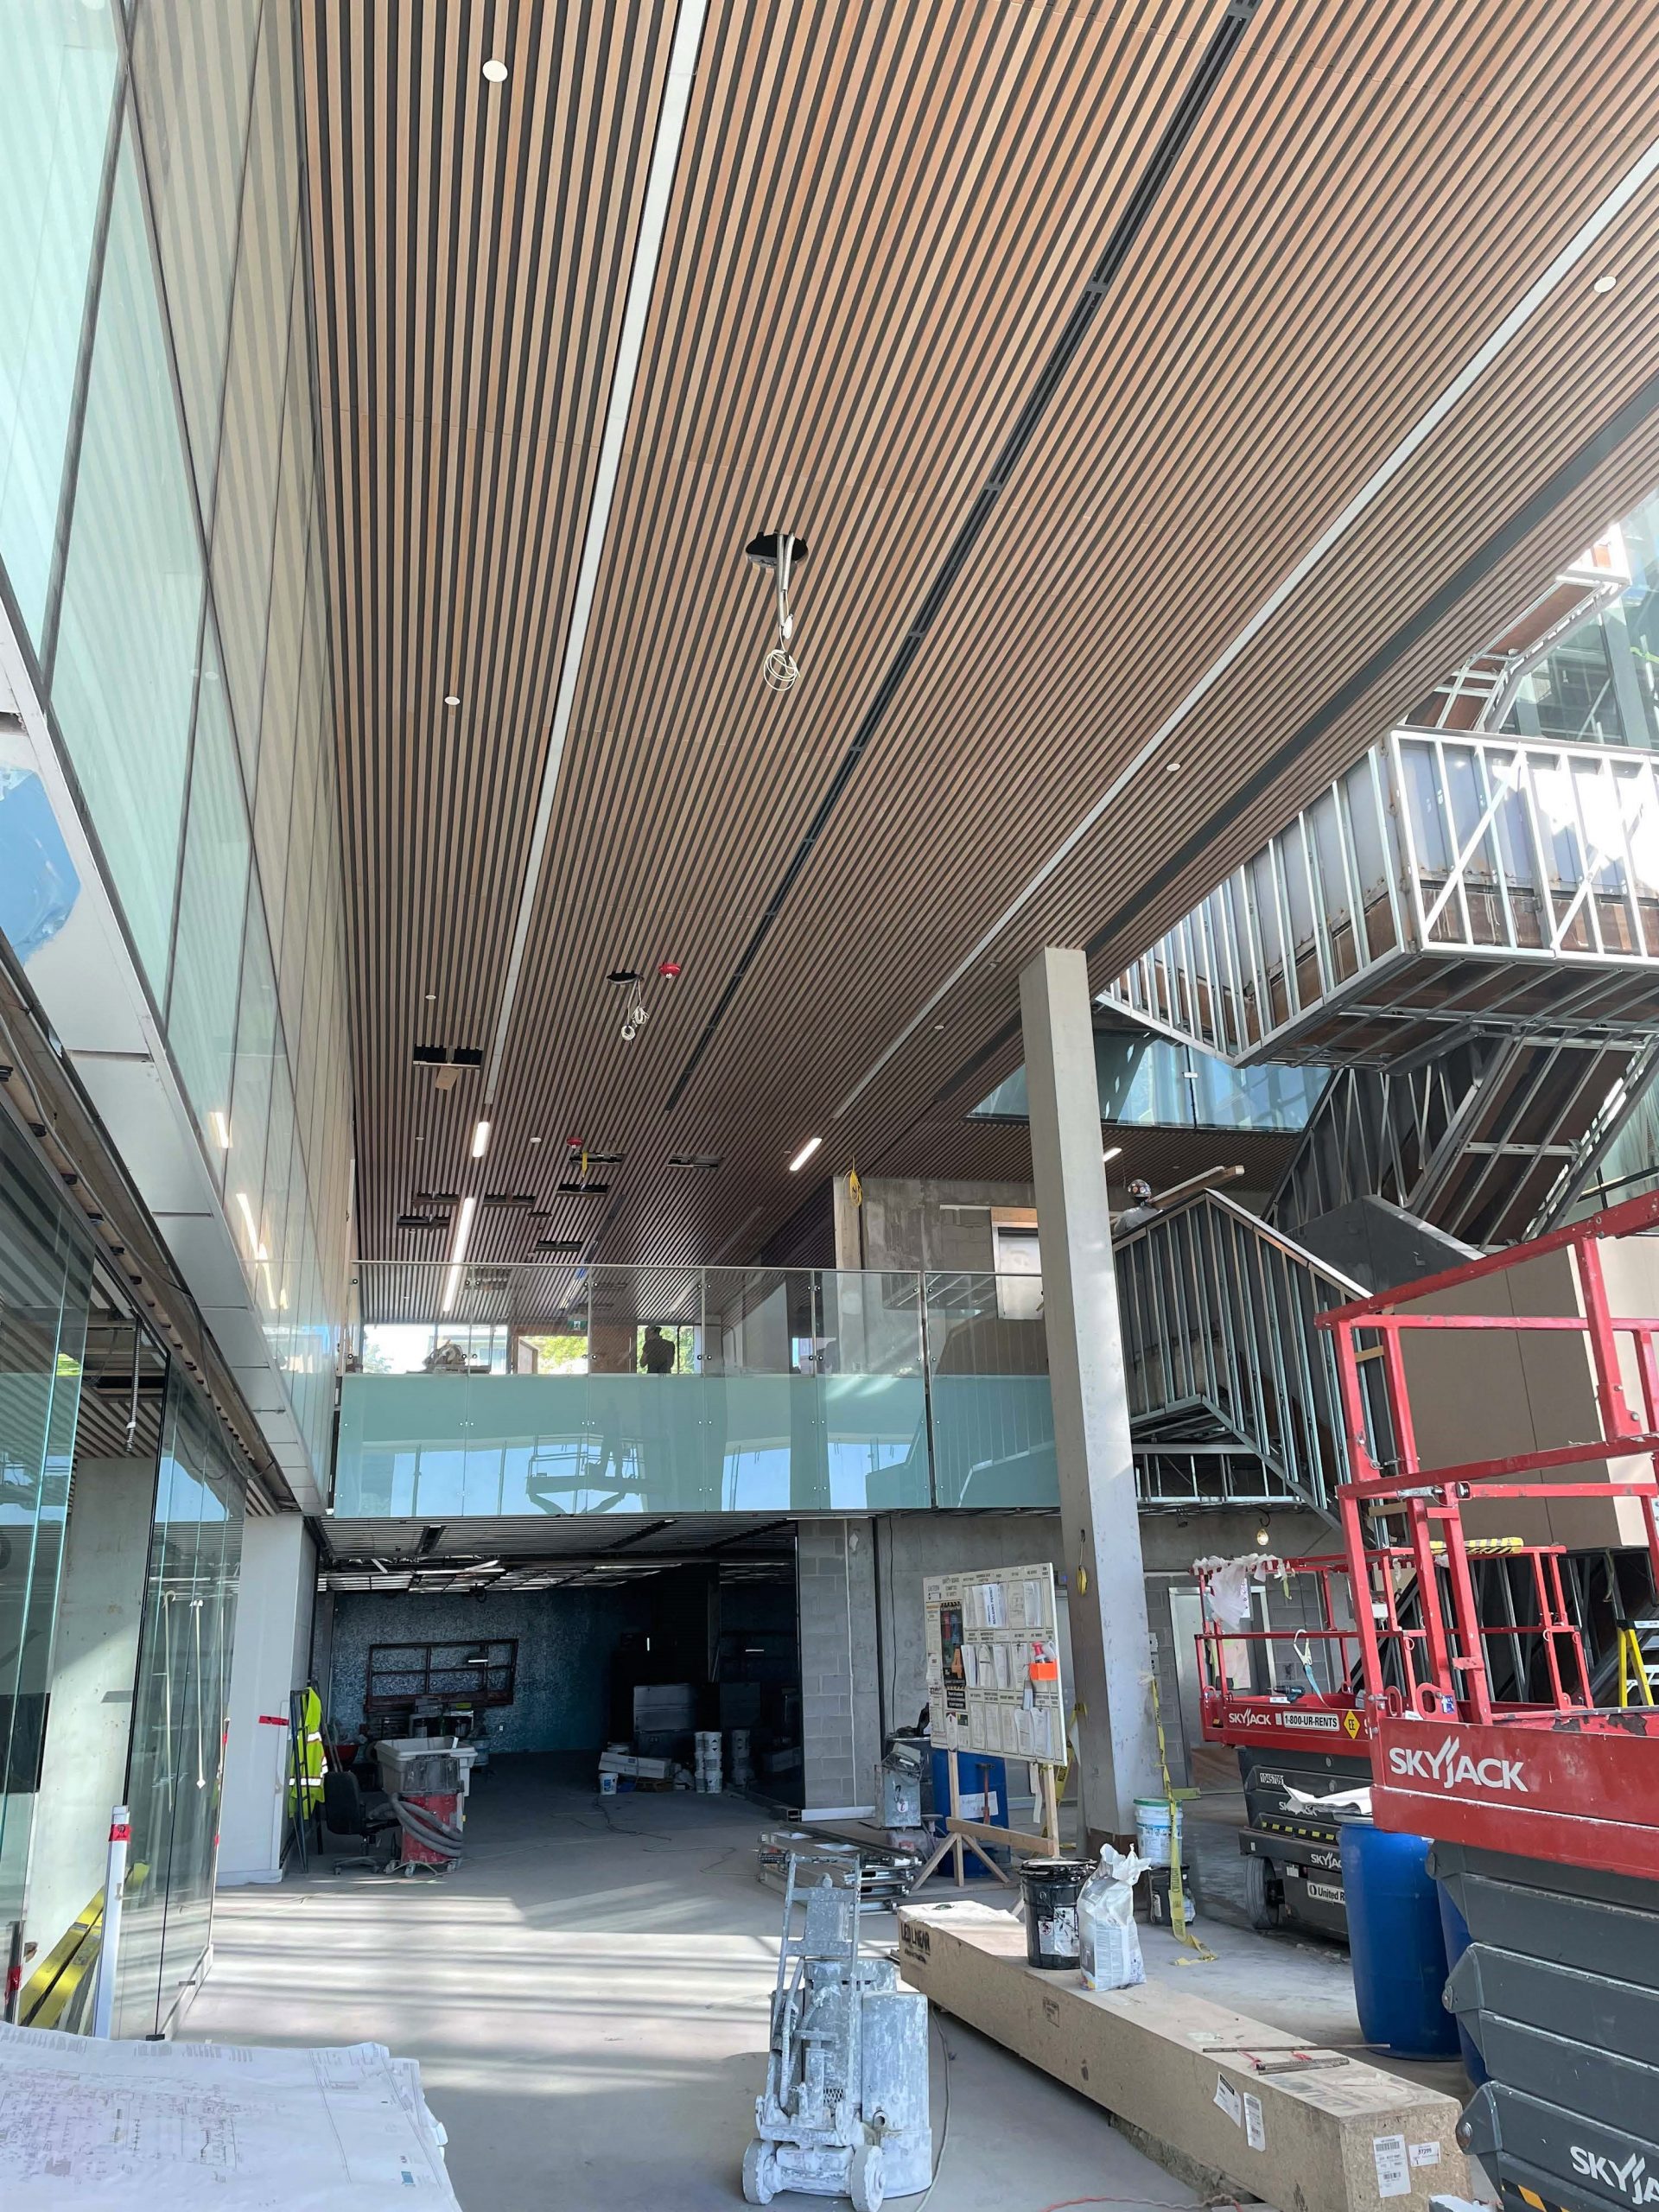 A photograph of the main gymnasium during construction, which shows partially installed basketball nets and an unfinished floor. The gymnasium is surrounded by glass walls which extend to the second floor running/walking track, which surrounds the gymnasium. 